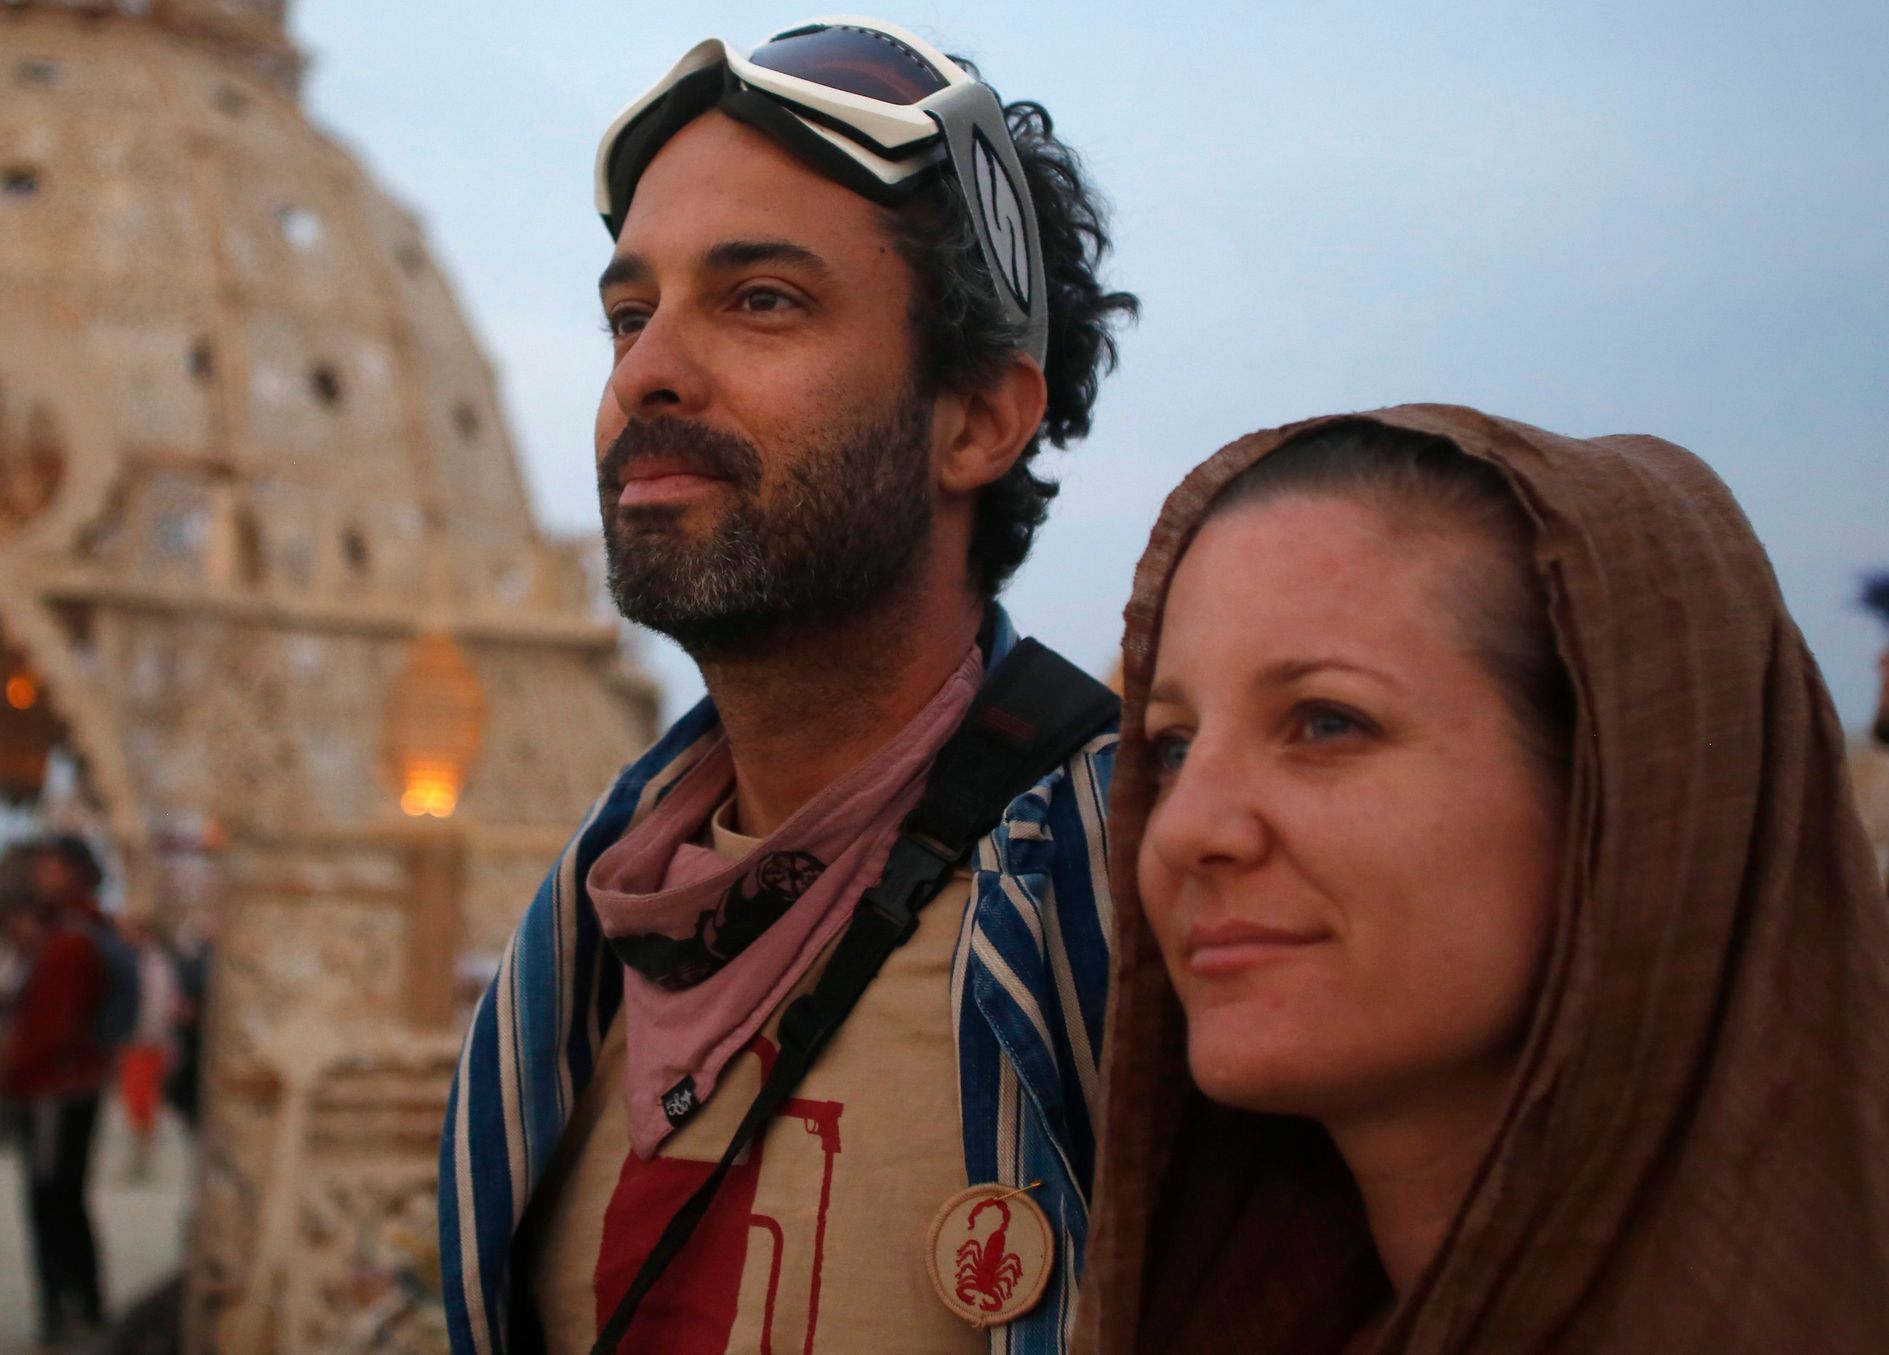 Dan Parras, left, and Melissa Bauman wait for the sun to rise at the Temple of Grace during the Burning Man 2014 &quot;Caravansary&quot; arts and music festival in the Black Rock Desert of Nevada